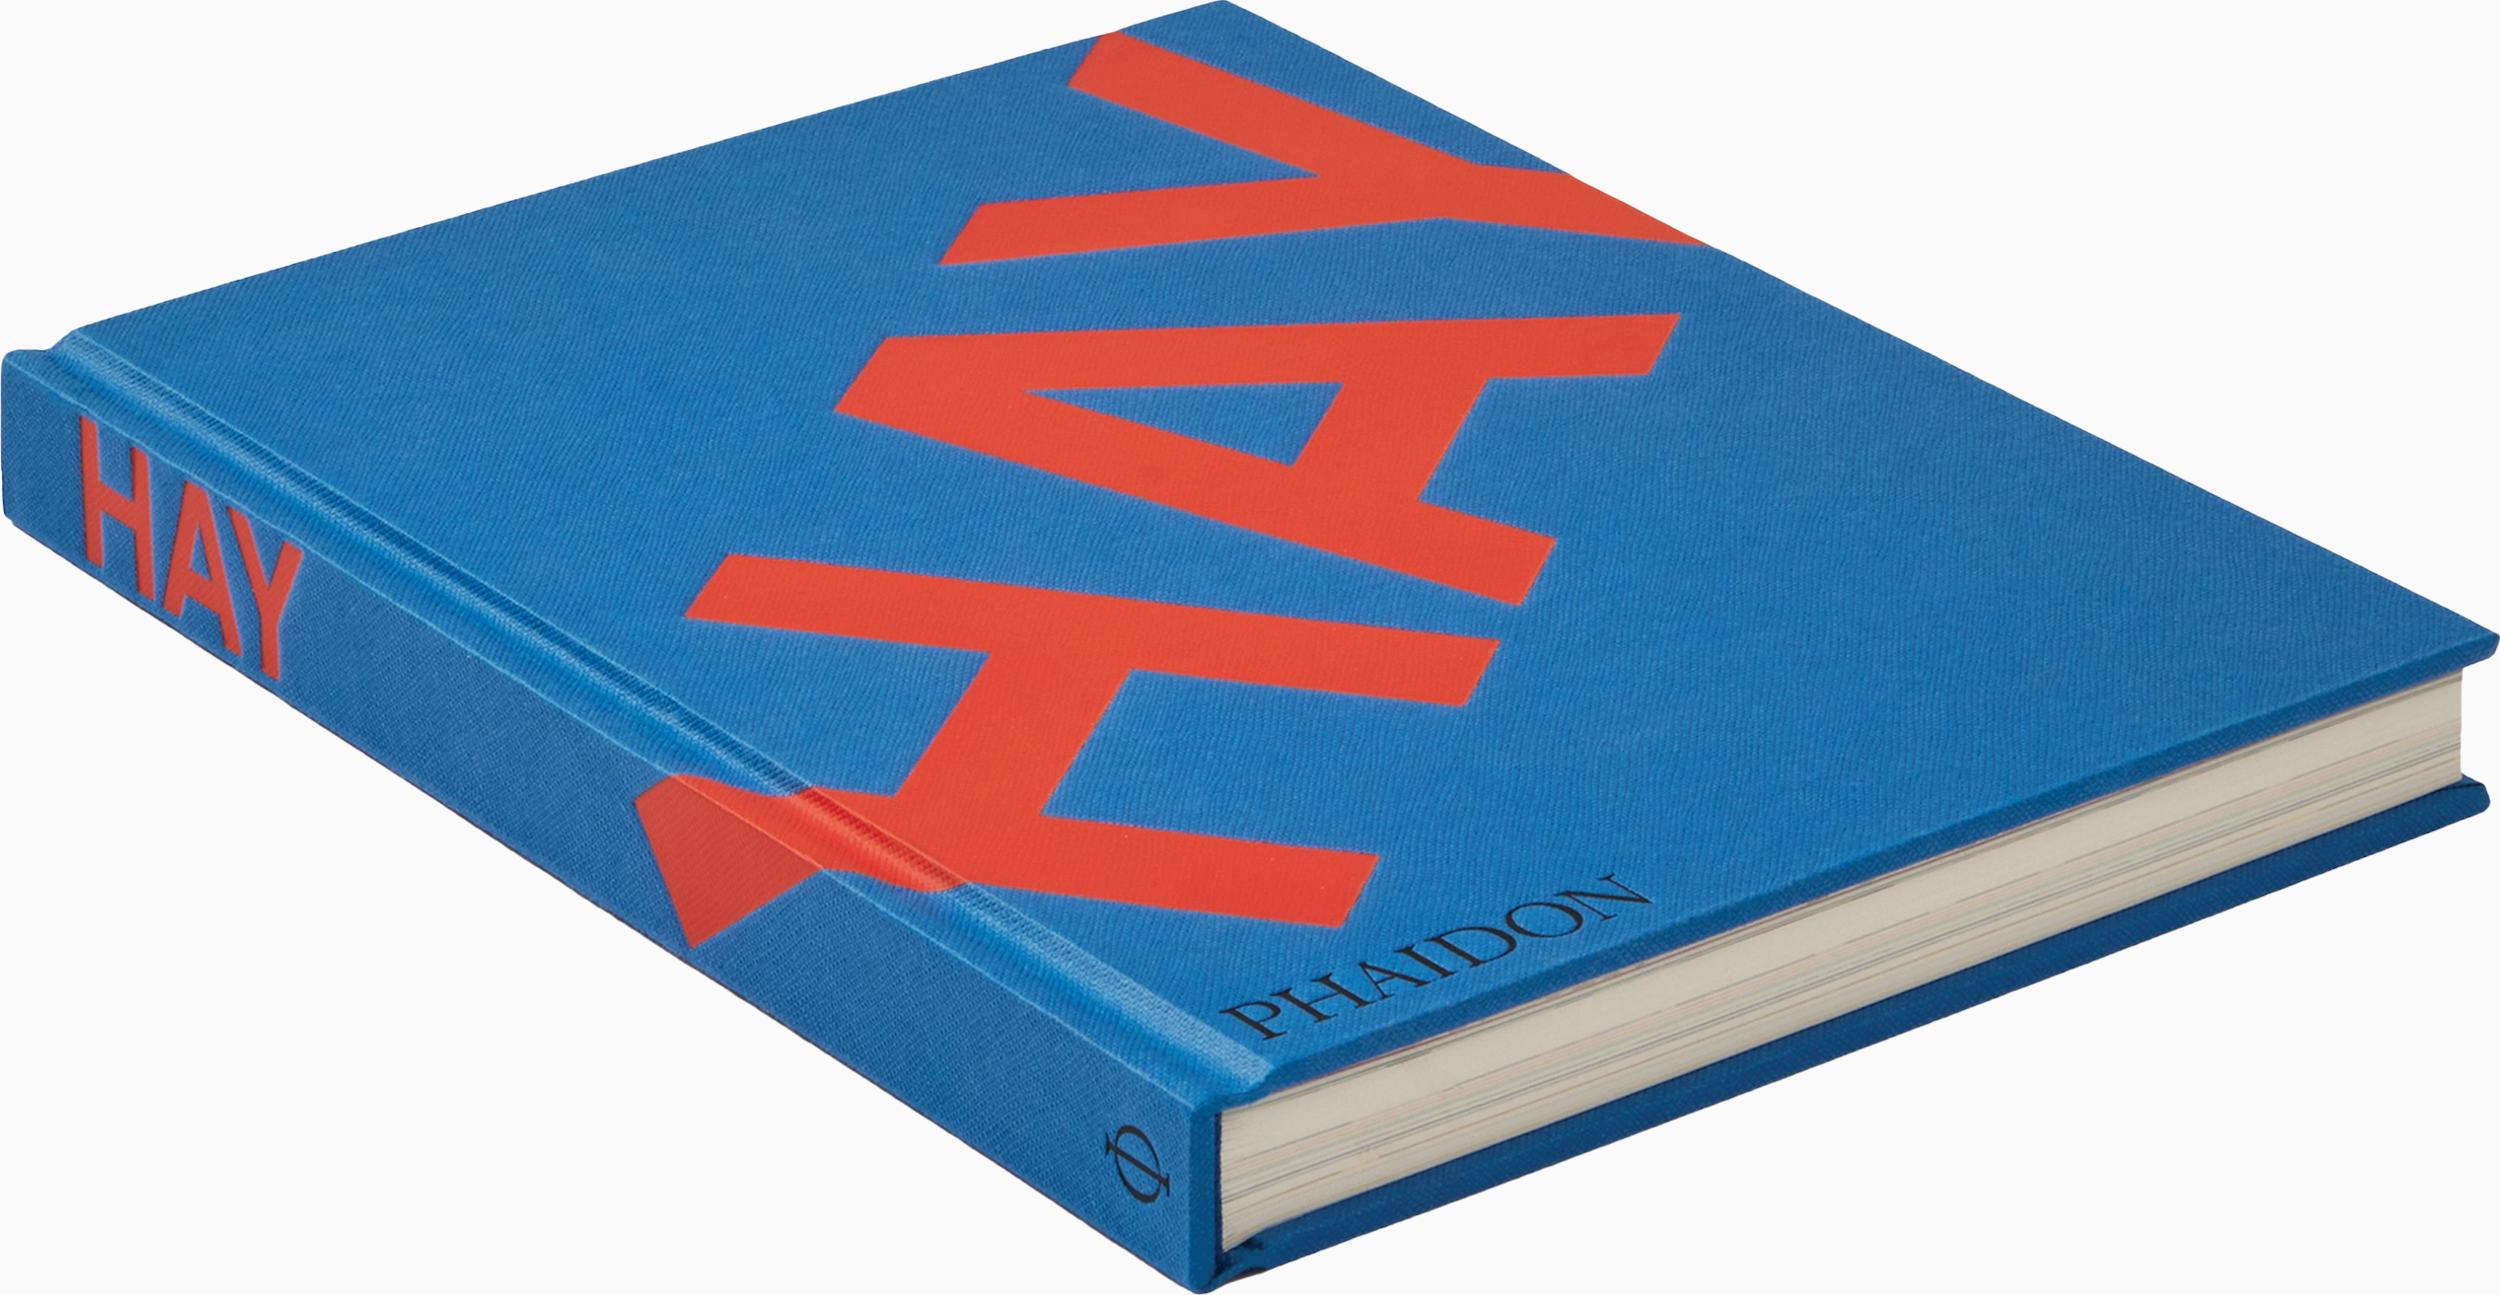 The Phaidon 100: The Complete Collection, Collections, Store